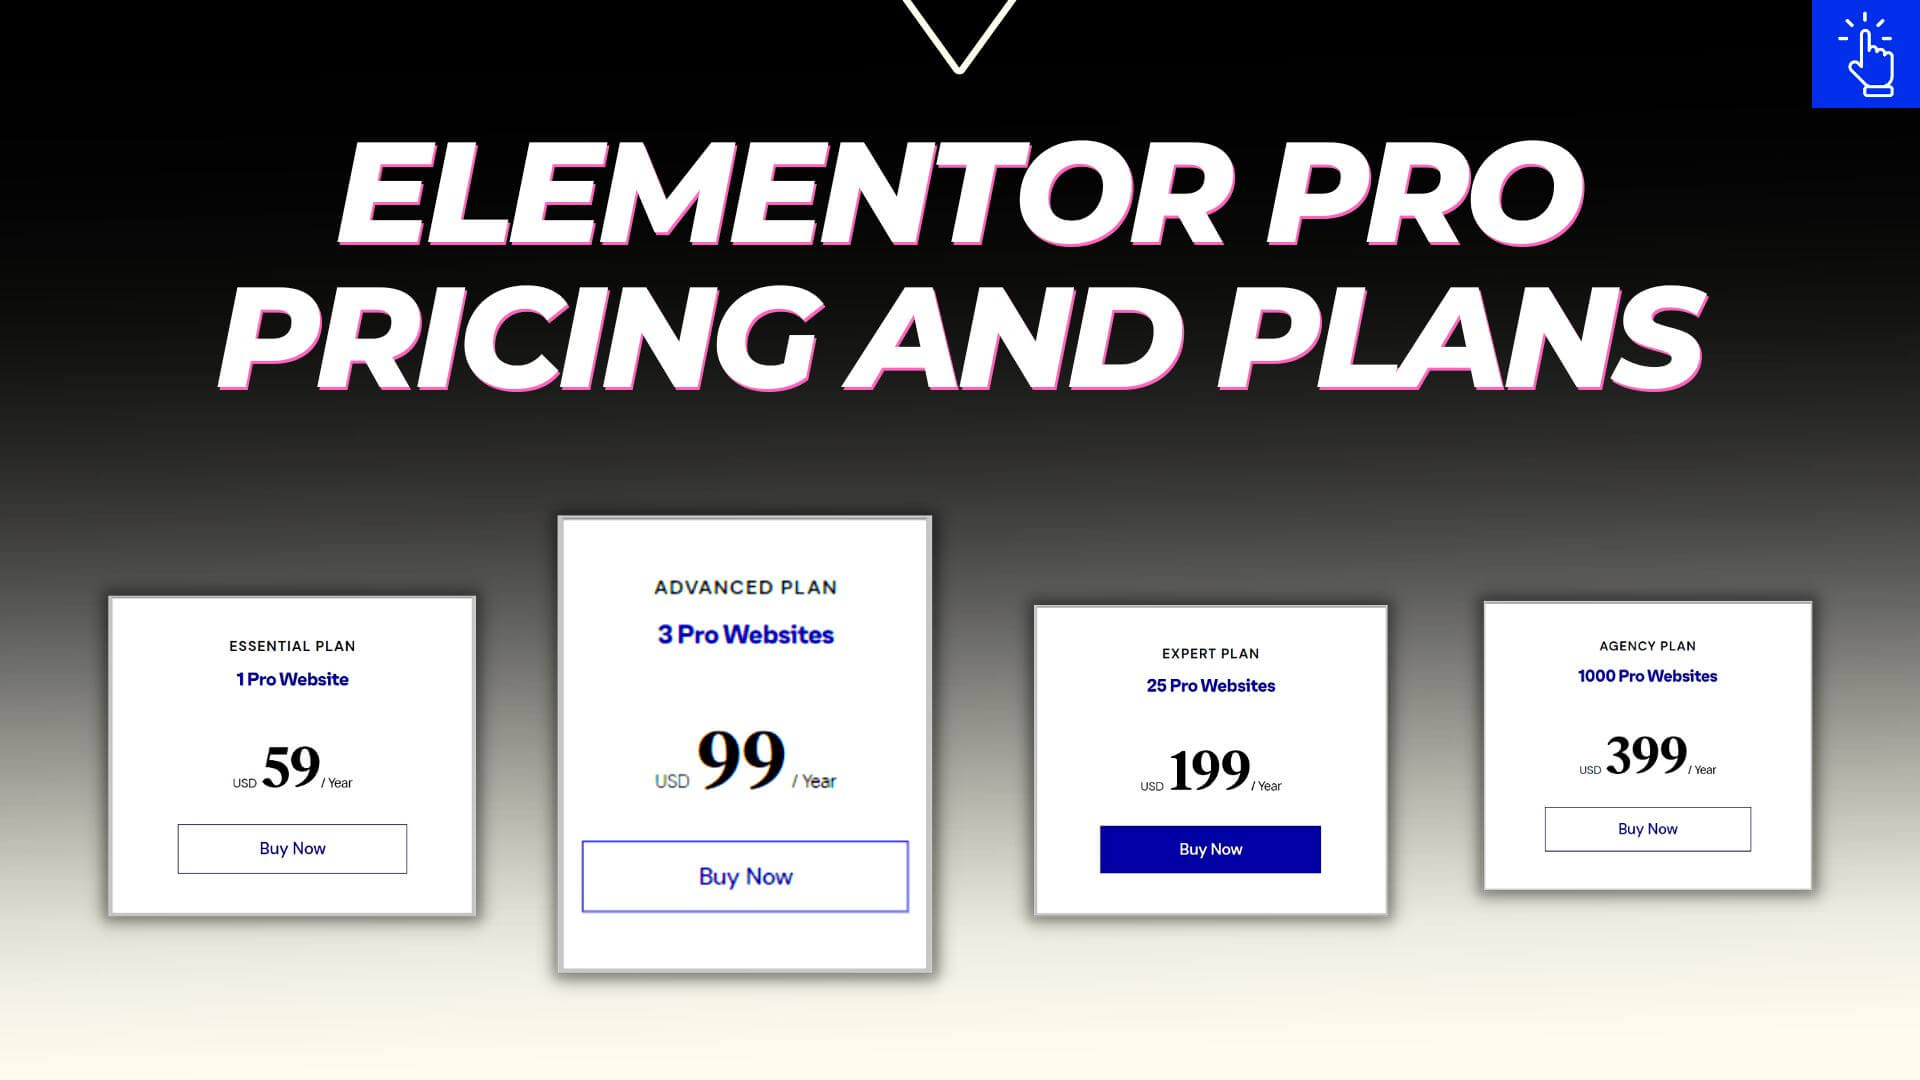 Elementor Pro Pricing and Plans